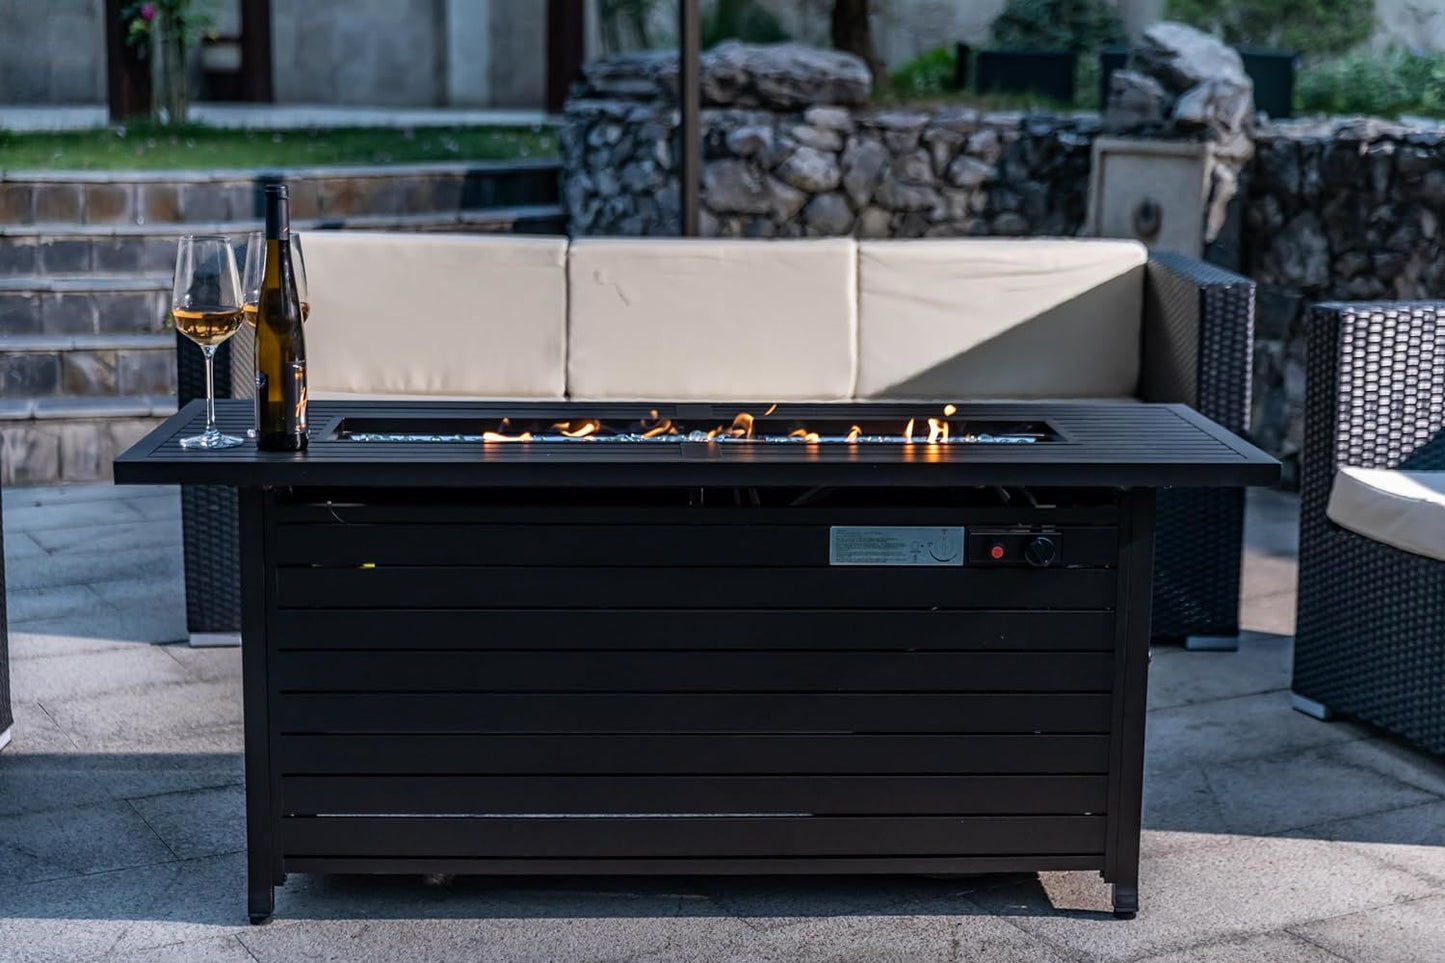 LEGACY HEATING 57 Inch Propane Fire Pit Table, 50,000BTU Outdoor Gas Fire Pit, 2 in 1 Rectangular Firepit Extruded Aluminum w/ Lid, Glass Beads, ETL Certified for Gatherings on Garden Backyard, Mocha